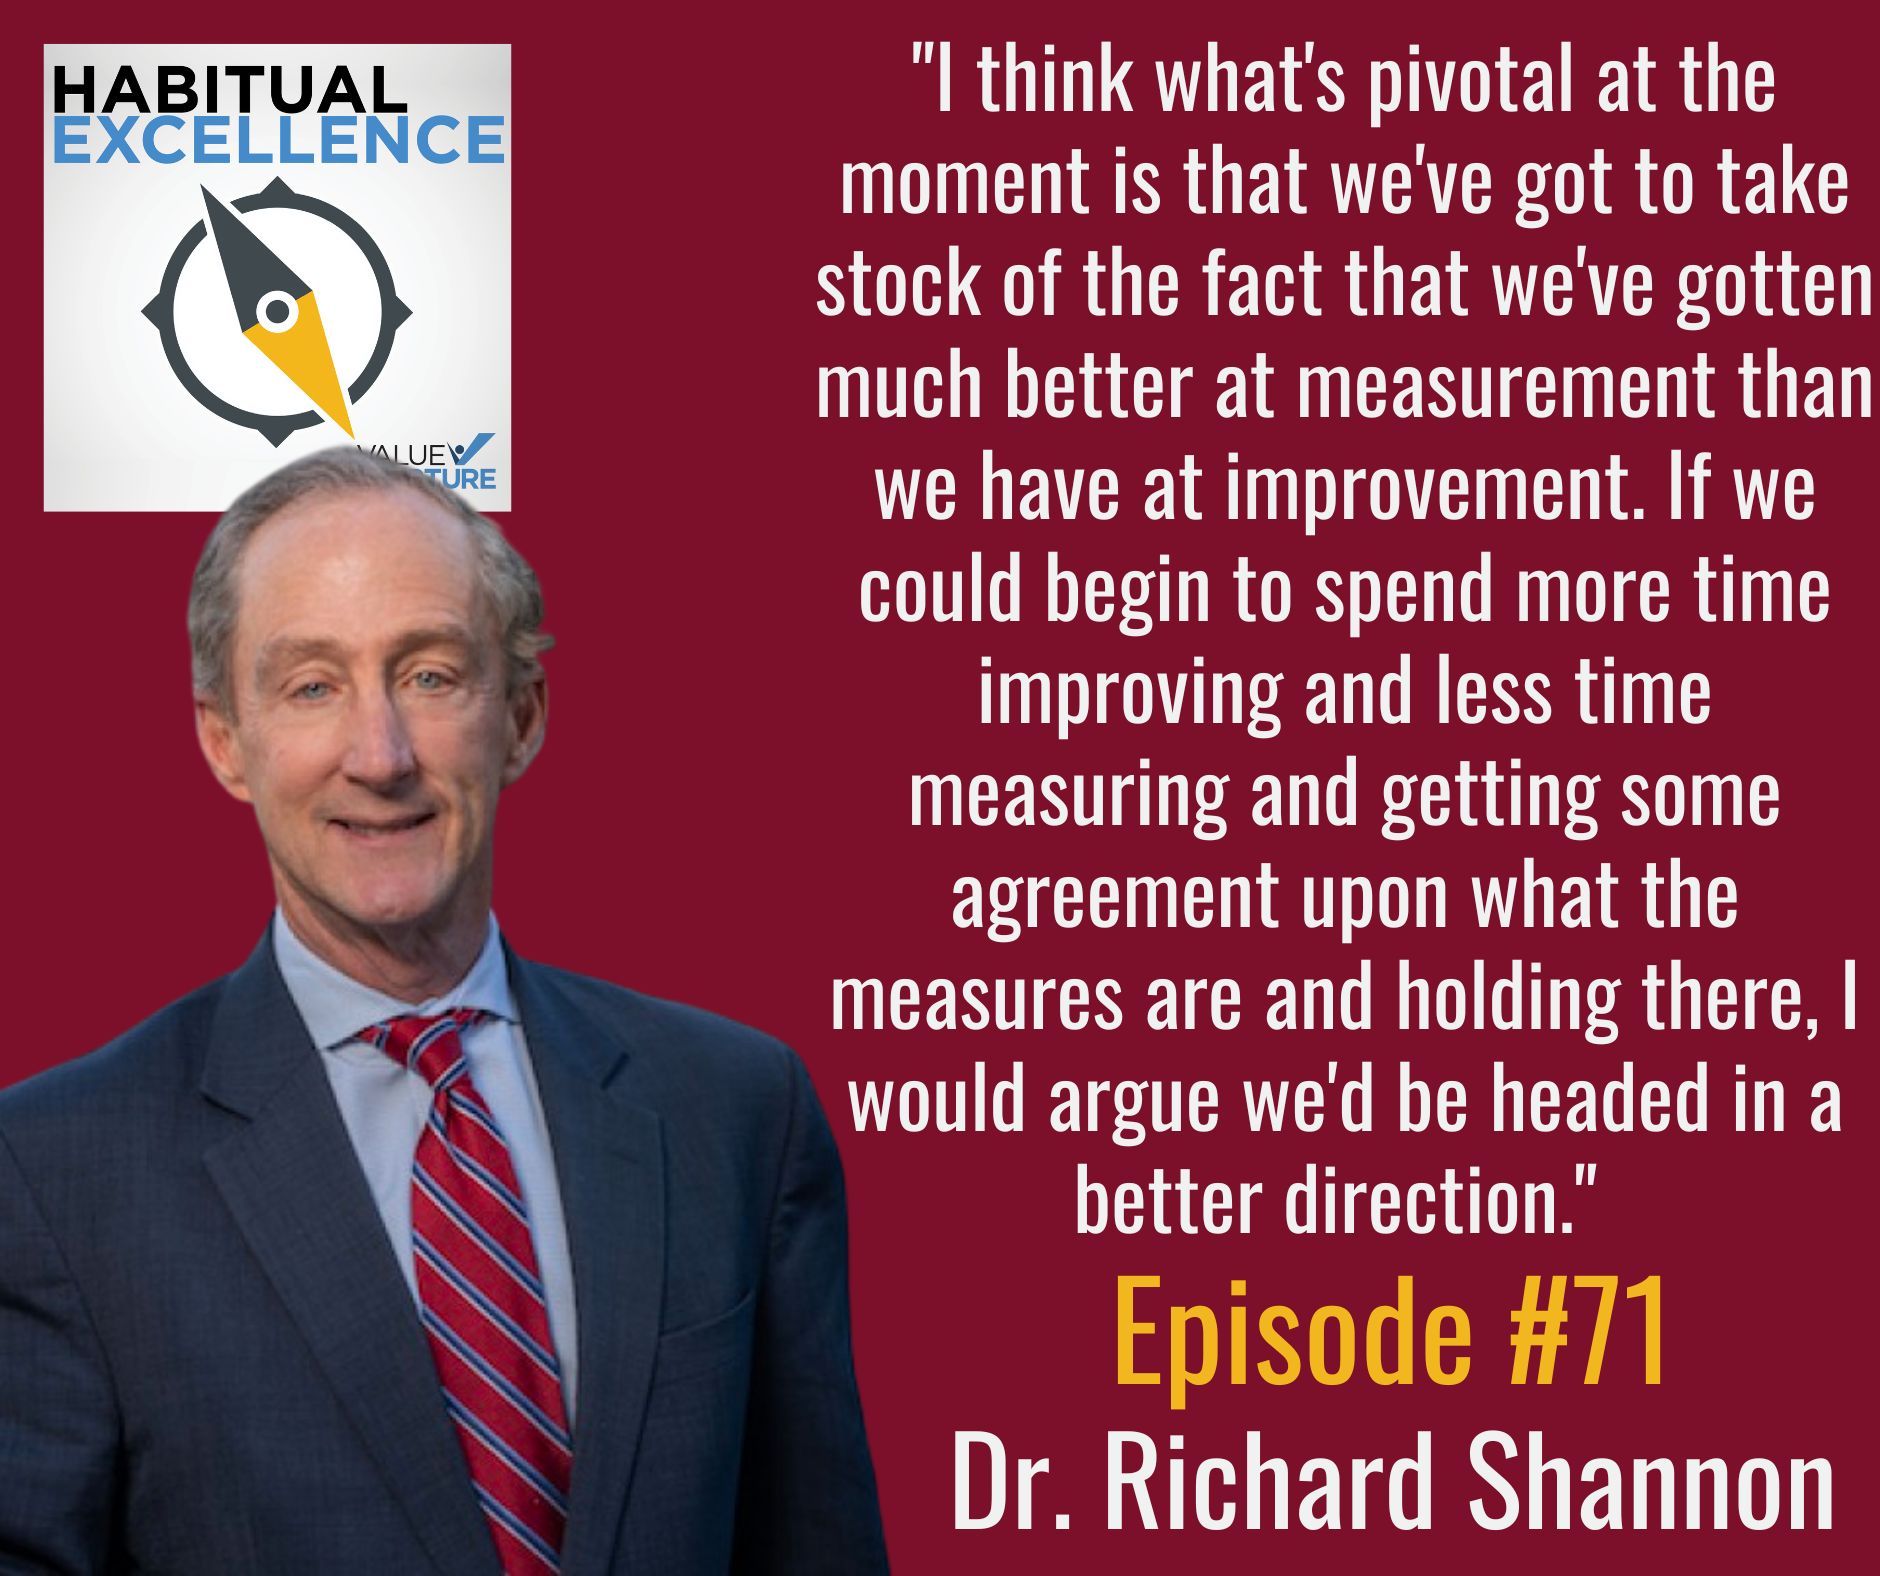 "I think what's pivotal at the moment is that we've got to take stock of the fact that we've gotten much better at measurement than we have at improvement. If we could begin to spend more time improving and less time measuring and getting some agreement upon what the measures are and holding there, I would argue we'd be headed in a better direction." 